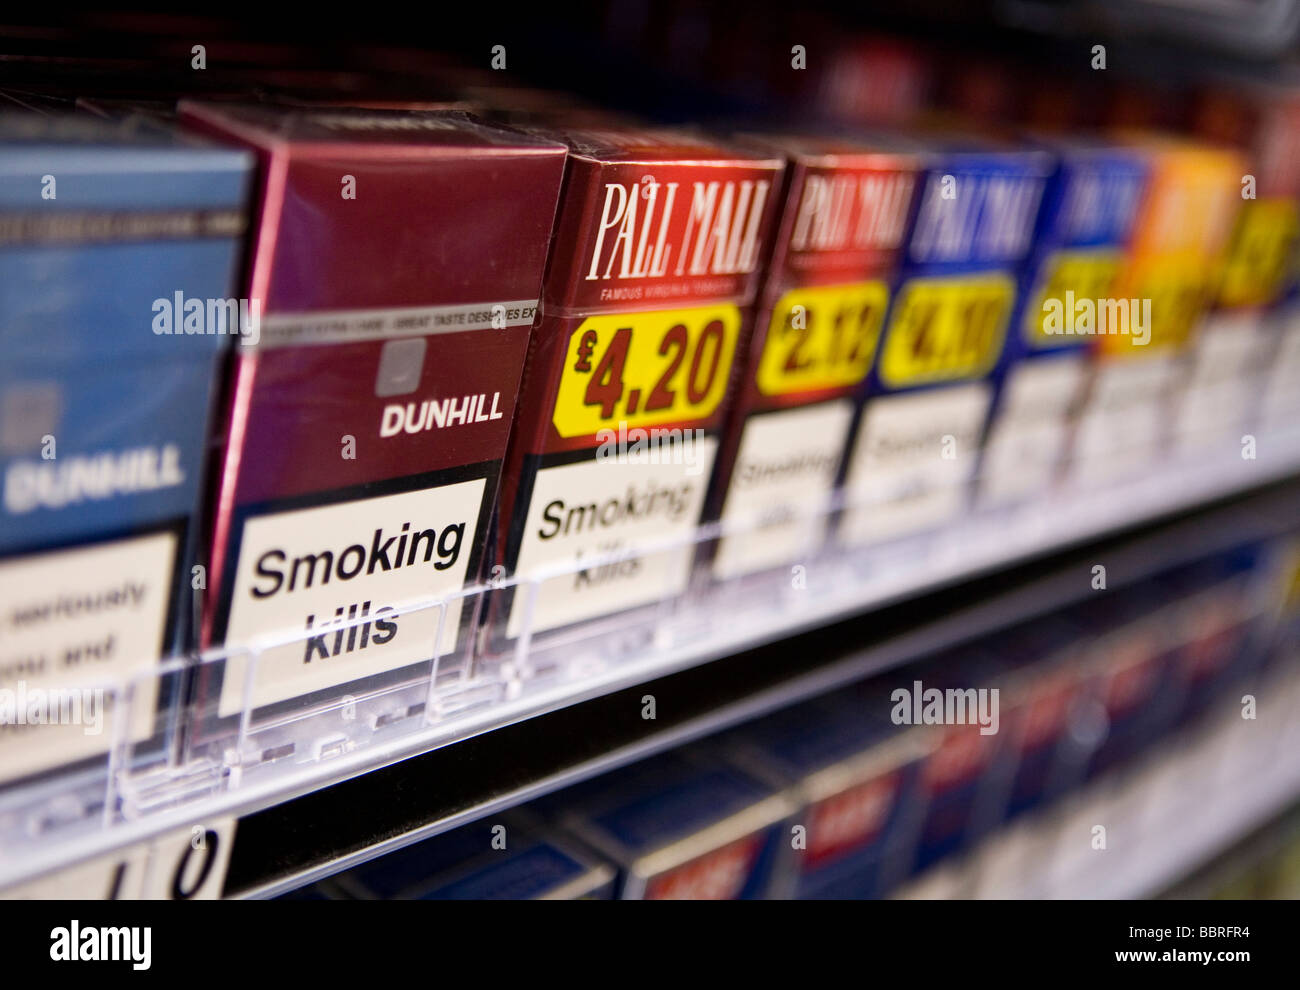 Packets of cigarettes made by British American Tobacco sit on the shelf of a retail store Stock Photo